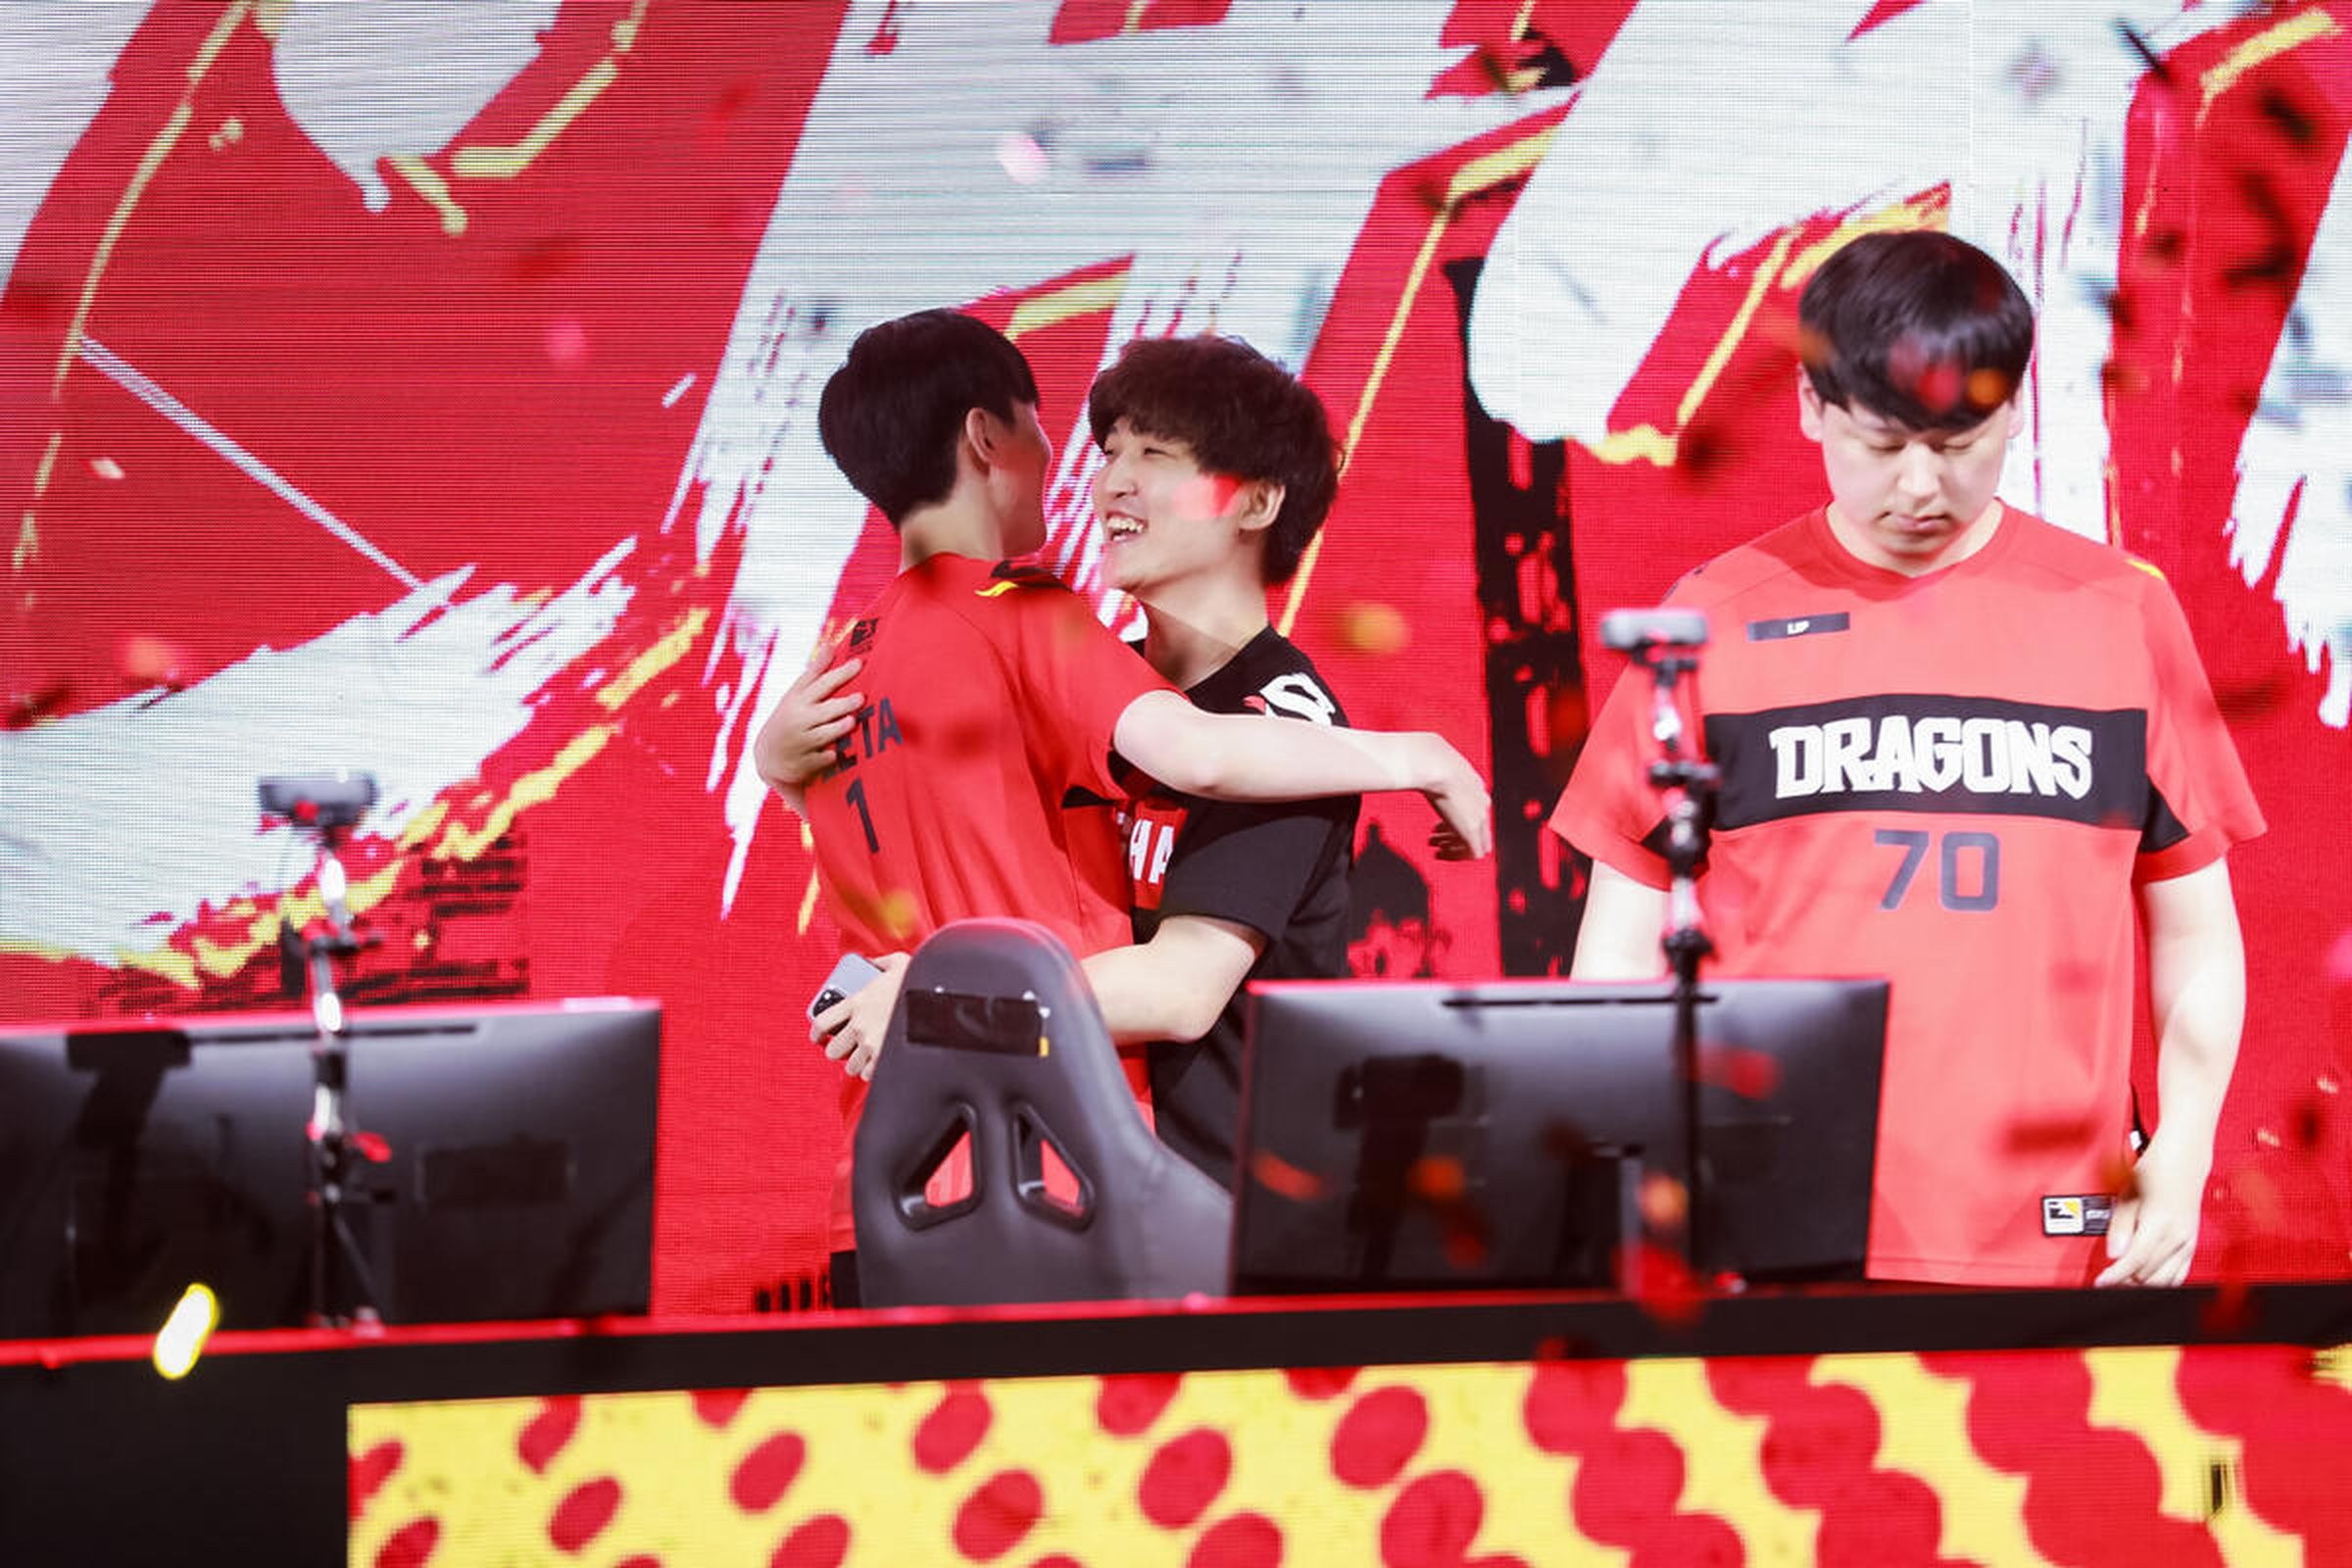 The Shanghai Dragons at the moment of their 2021 grand finals victory.